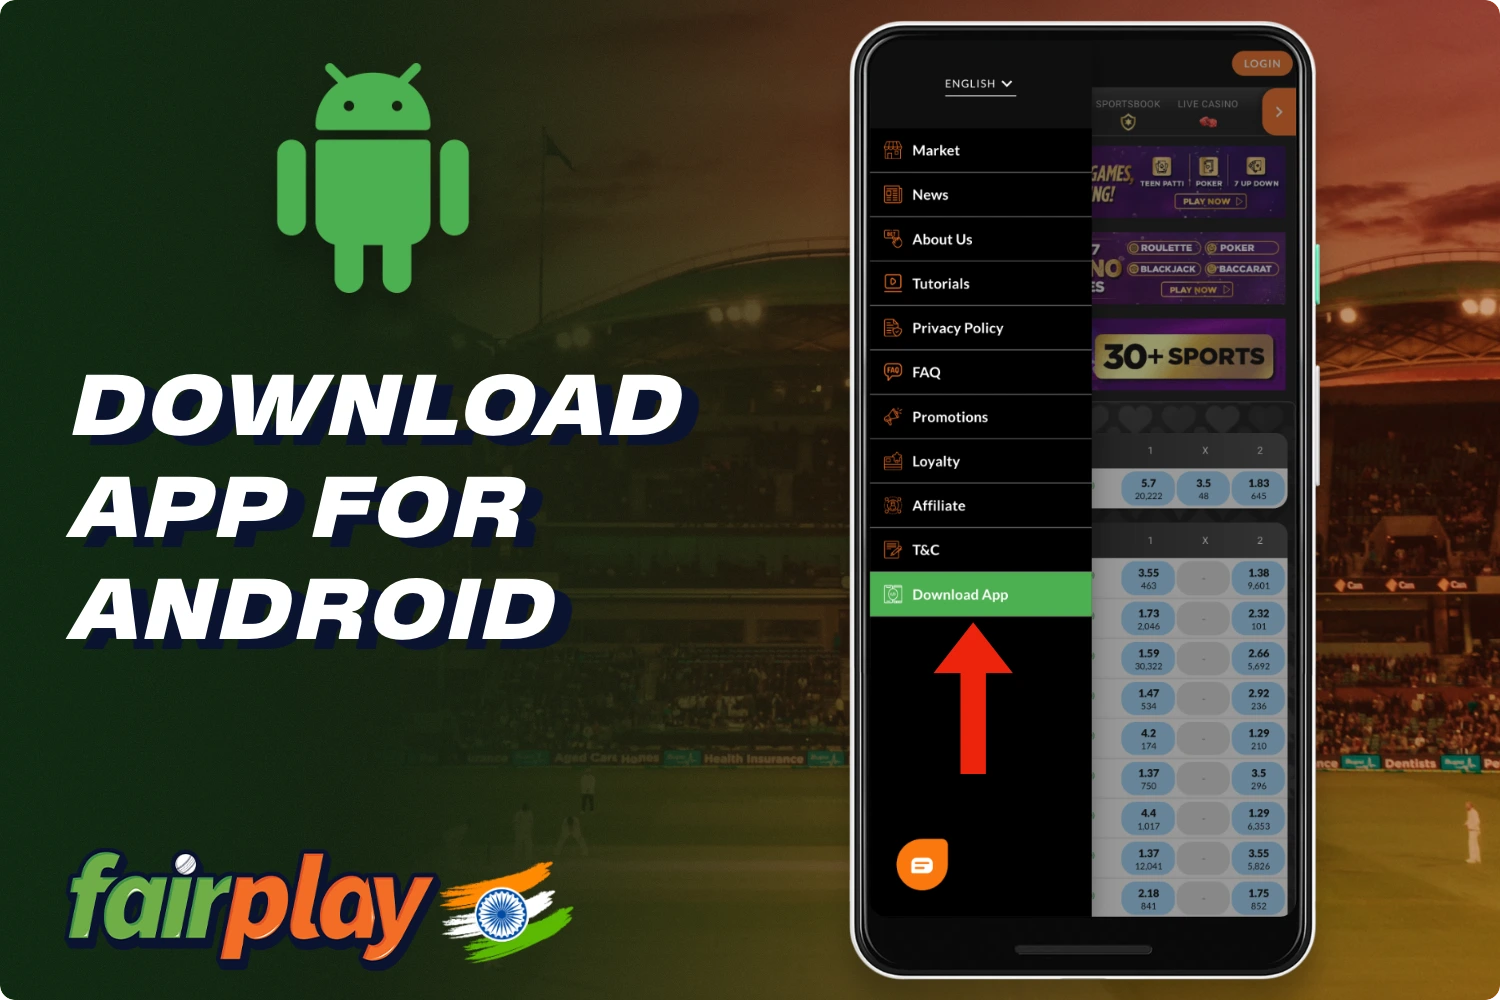 Indian users can download the Fairplay app for Android from the platform's official website